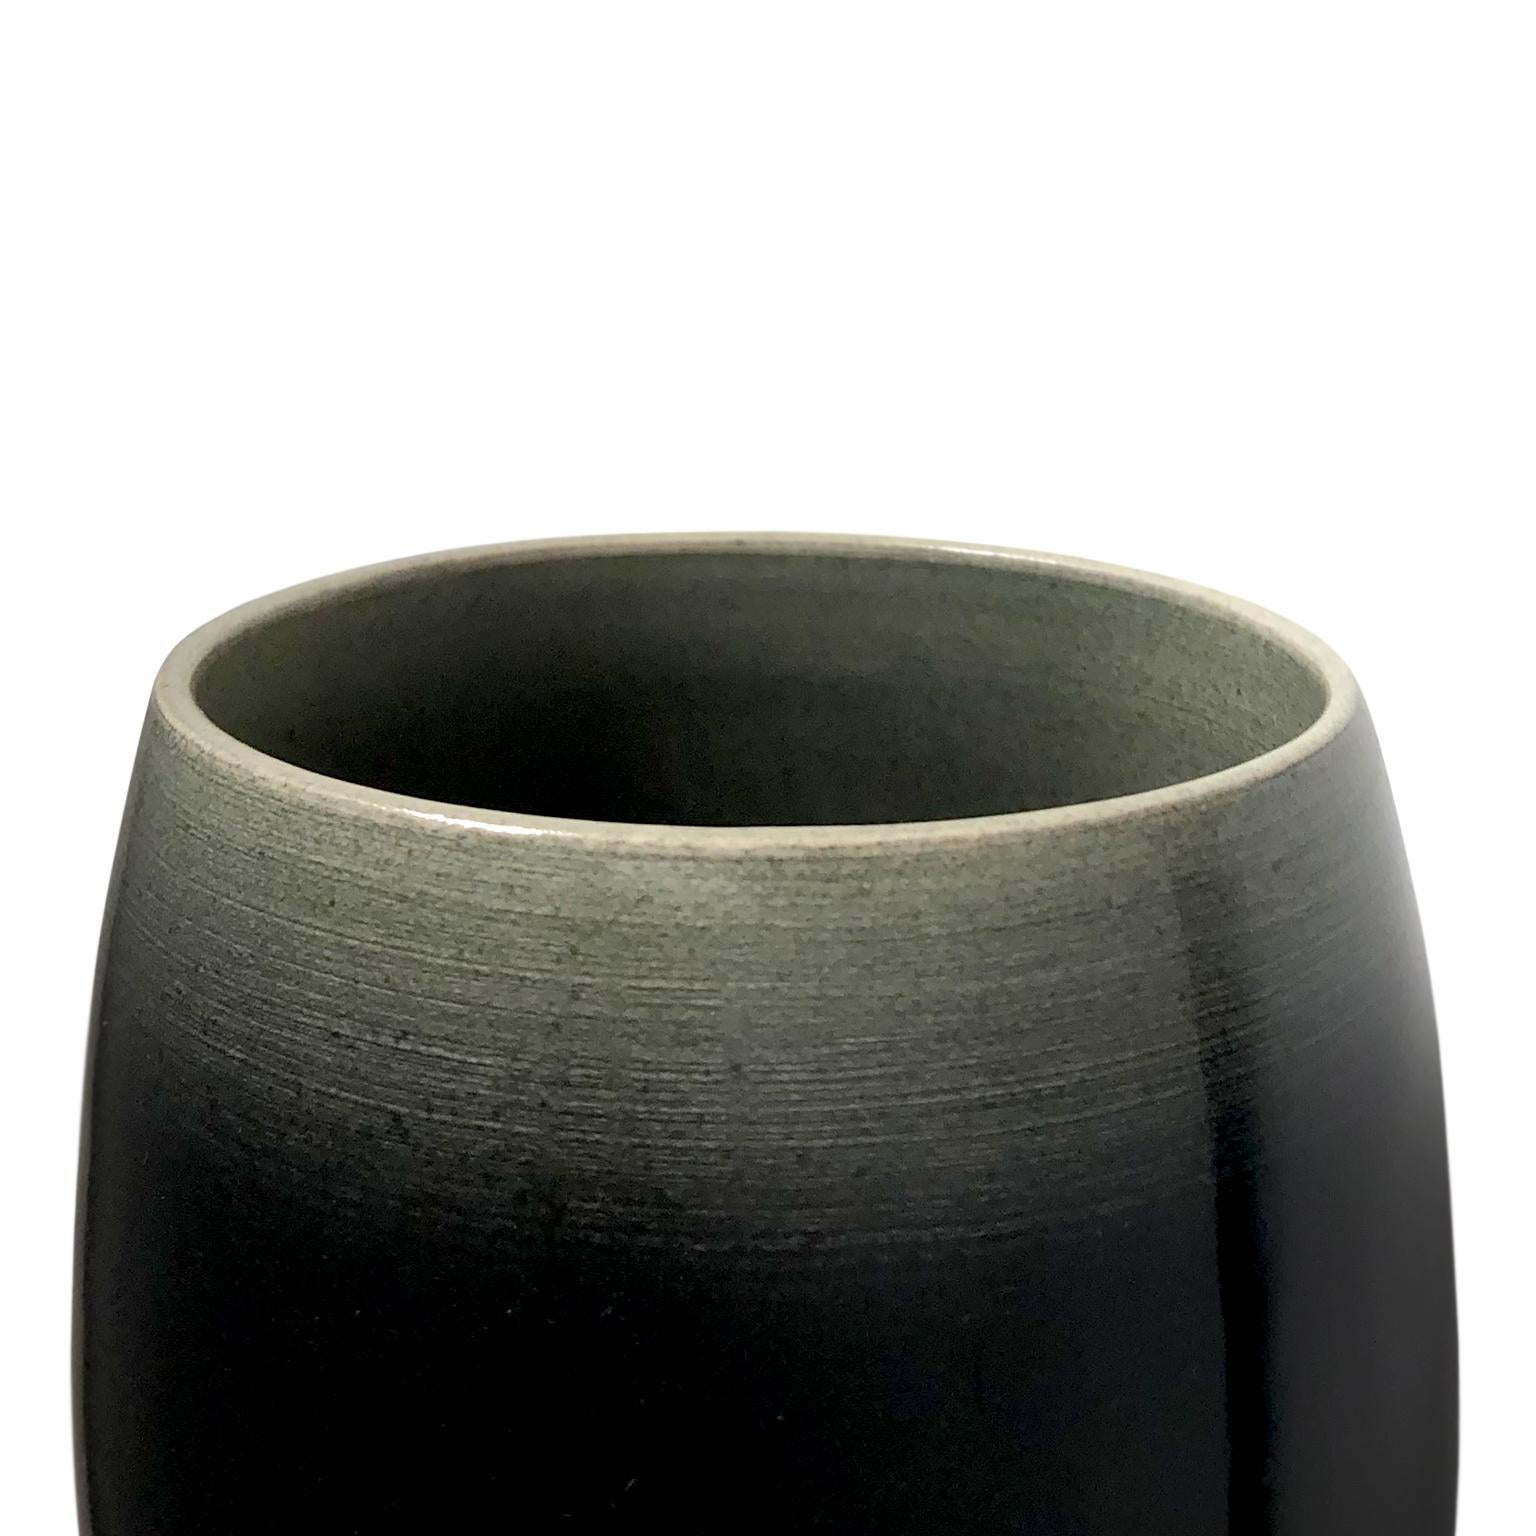 Tall dark ombre glaze ceramic chalice by Sandi Fellman, 2018. 

Veteran photographer Sandi Fellman's ceramic vessels are an exploration of a new medium. The forms, palettes, and sensuality of her photos can be found within each piece. The tactile